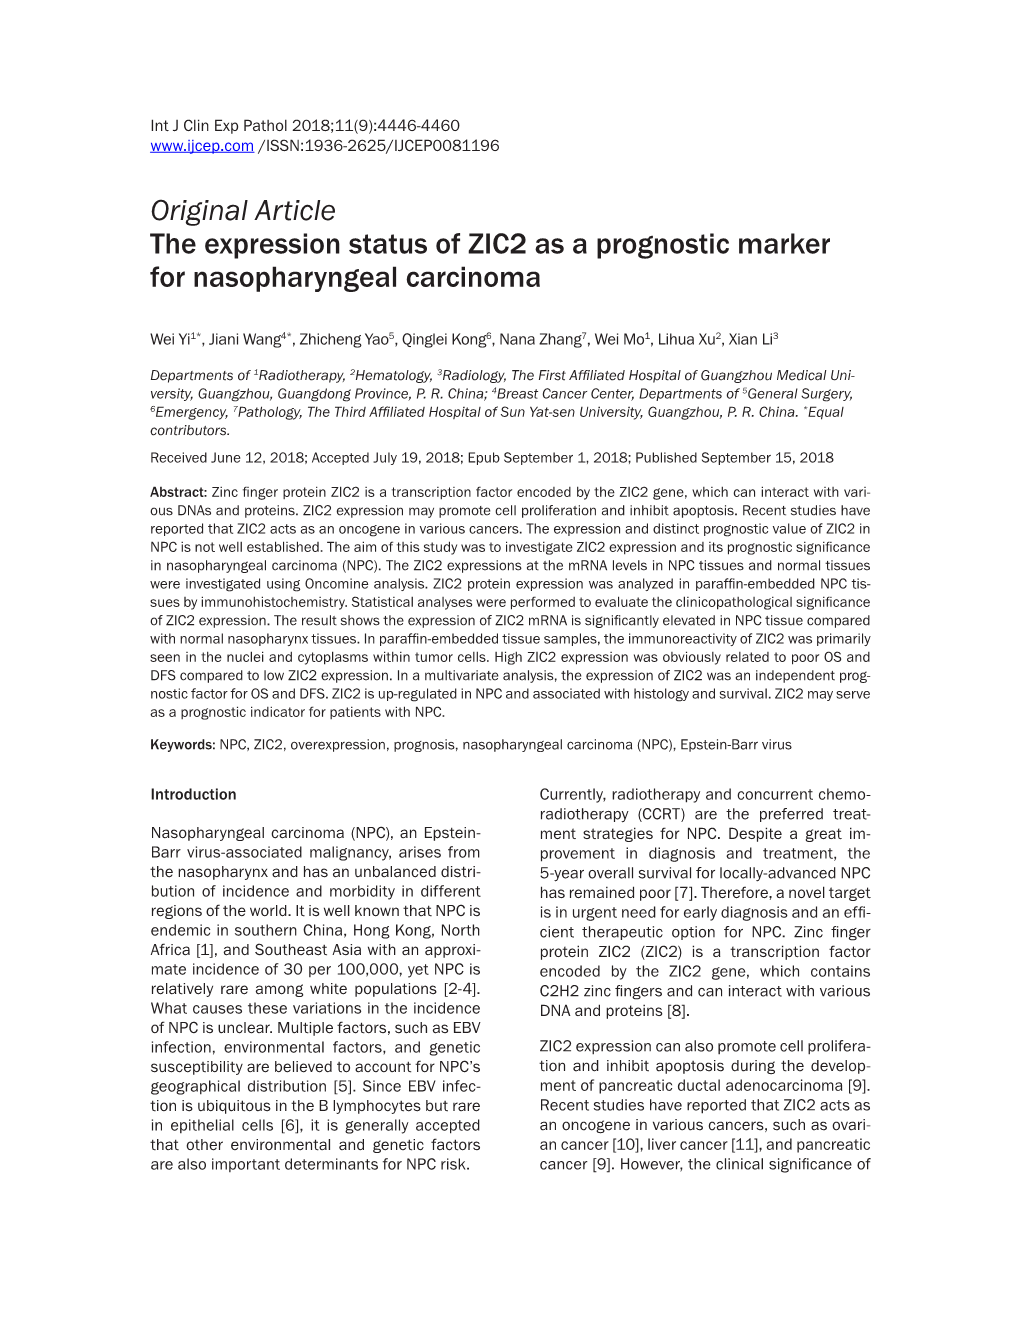 Original Article the Expression Status of ZIC2 As a Prognostic Marker for Nasopharyngeal Carcinoma